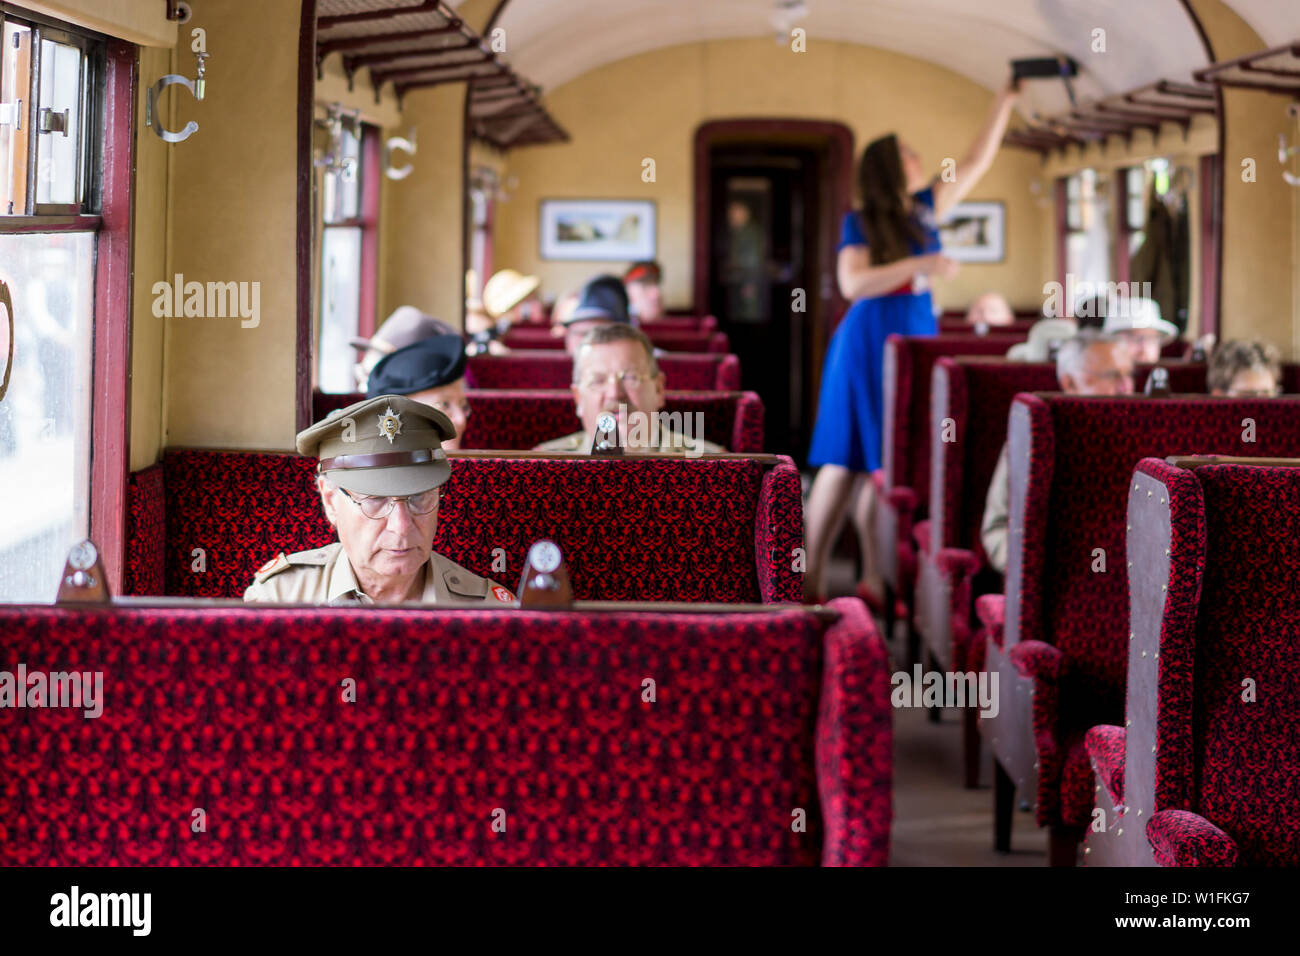 Kidderminster, UK. 29th June, 2019. Severn Valley Railways 'Step back to the 1940's' gets off to a fabulous start this summer with re-enactors playing their part in providing an authentic recreation of wartime, WW2 Britain. 1940s rail travel is shown with passengers, dressed in 1940s fashion, travelling inside one of the vintage railway carriages on this heritage railway line.  Credit: Lee Hudson Stock Photo